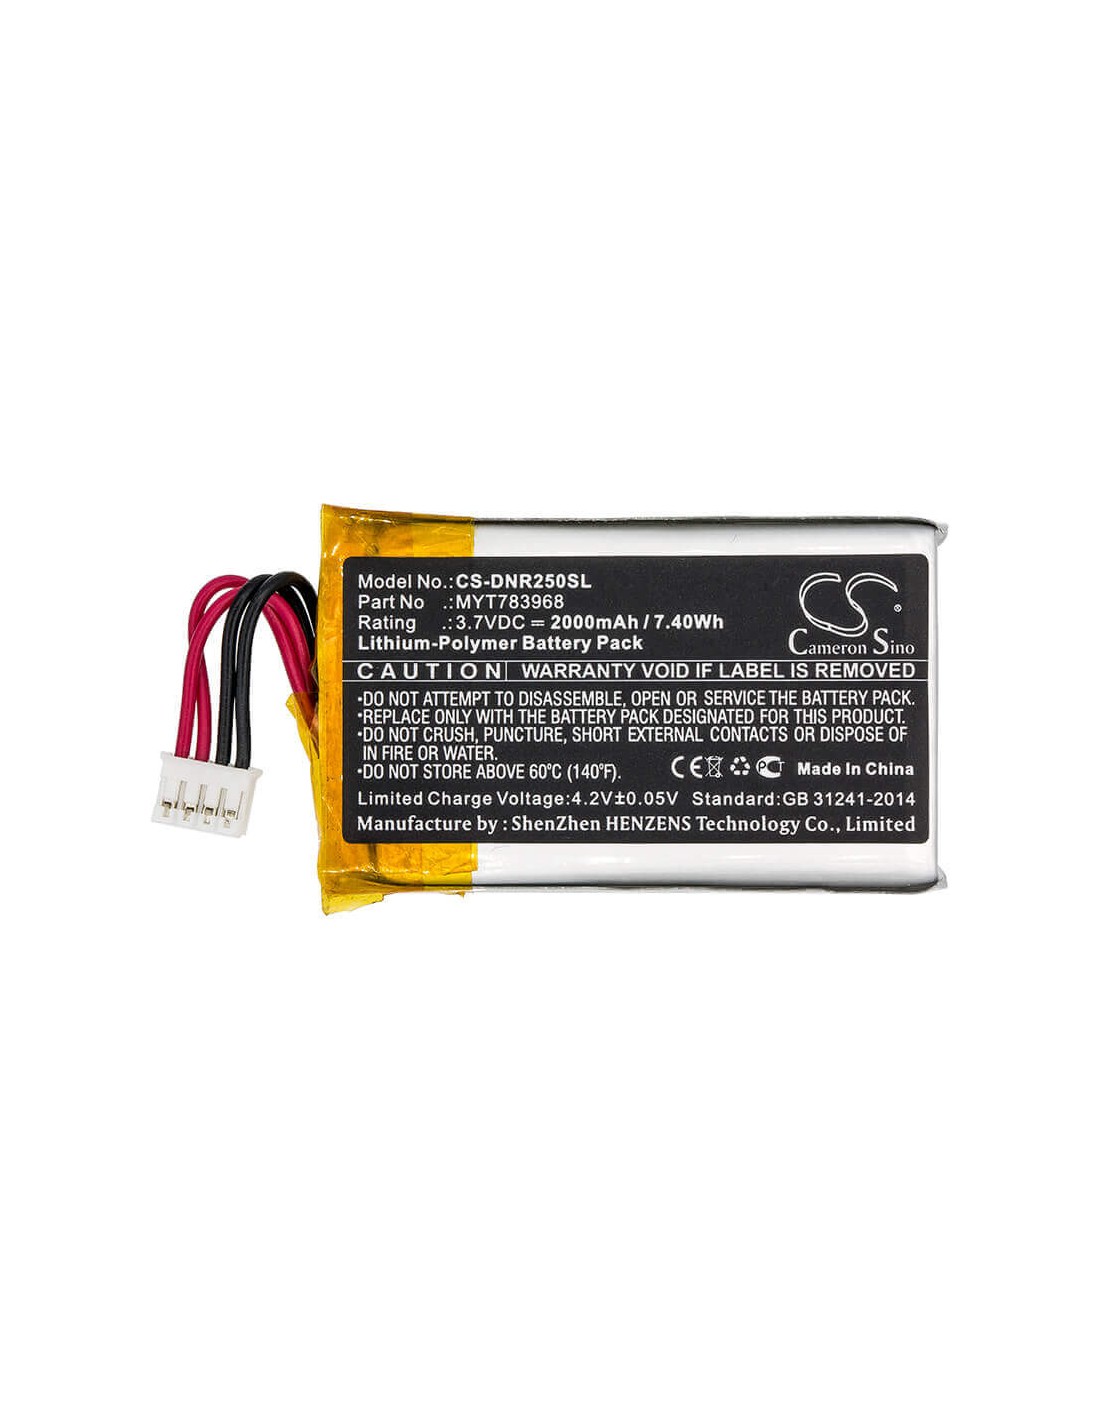 Battery for Delorme, Ag-008727-201, Incrh20, Inrch25 3.7V, 2000mAh - 7.40Wh